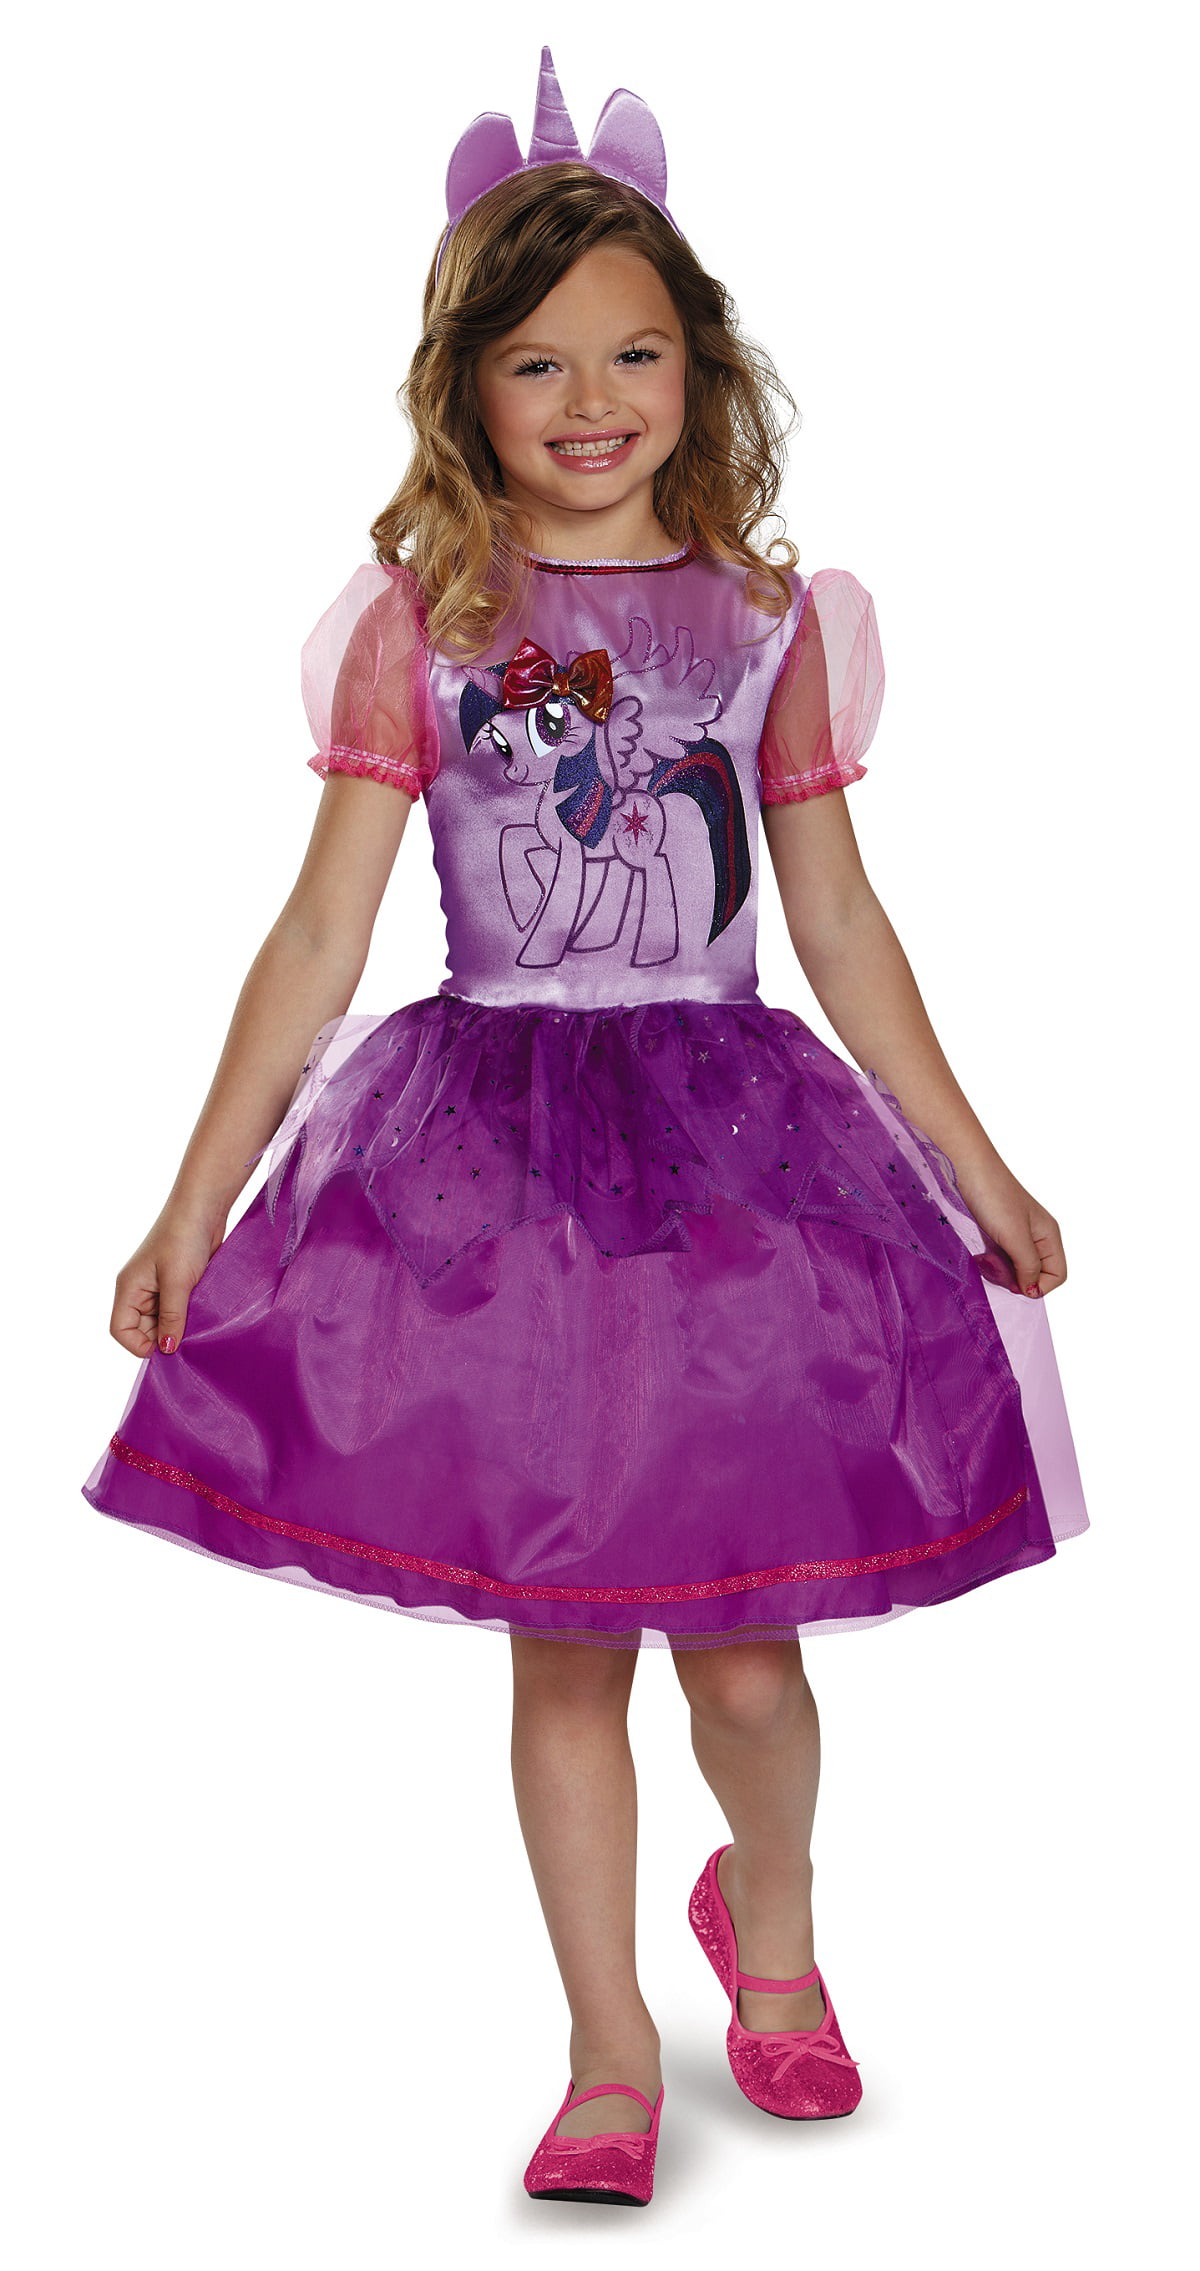 GIRLS TWILIGHT SPARKLE MY LIL PONY DELUXE COSTUME KIDS CUTE PRINCESS WINGS DRESS 